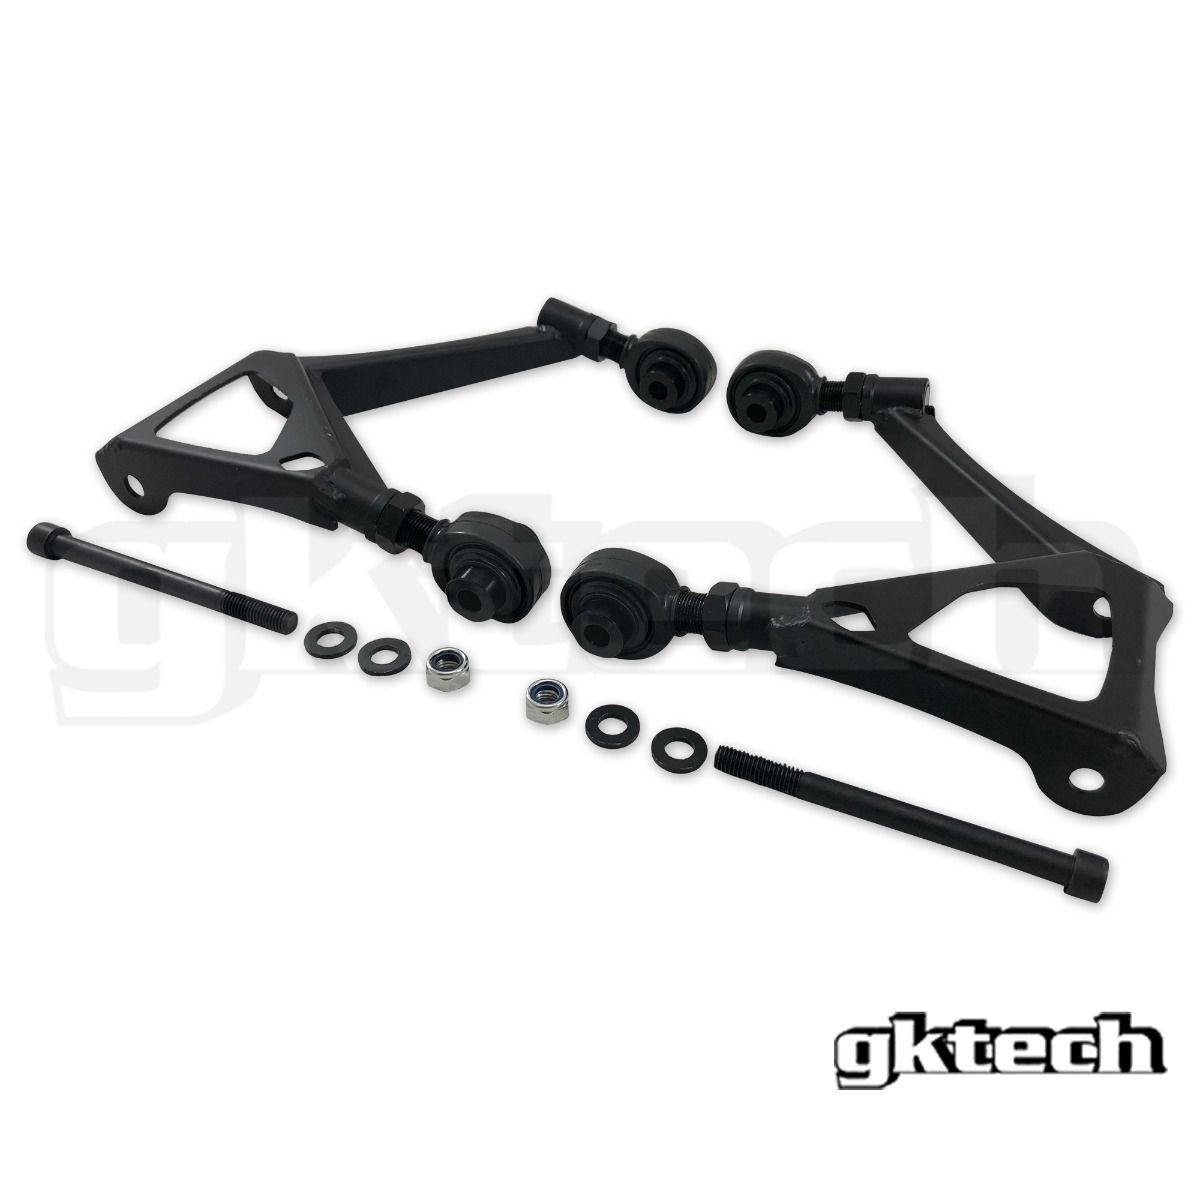 GKTech Front Upper Camber Arms (FUCAs) - Nissan Skyline R33, R34